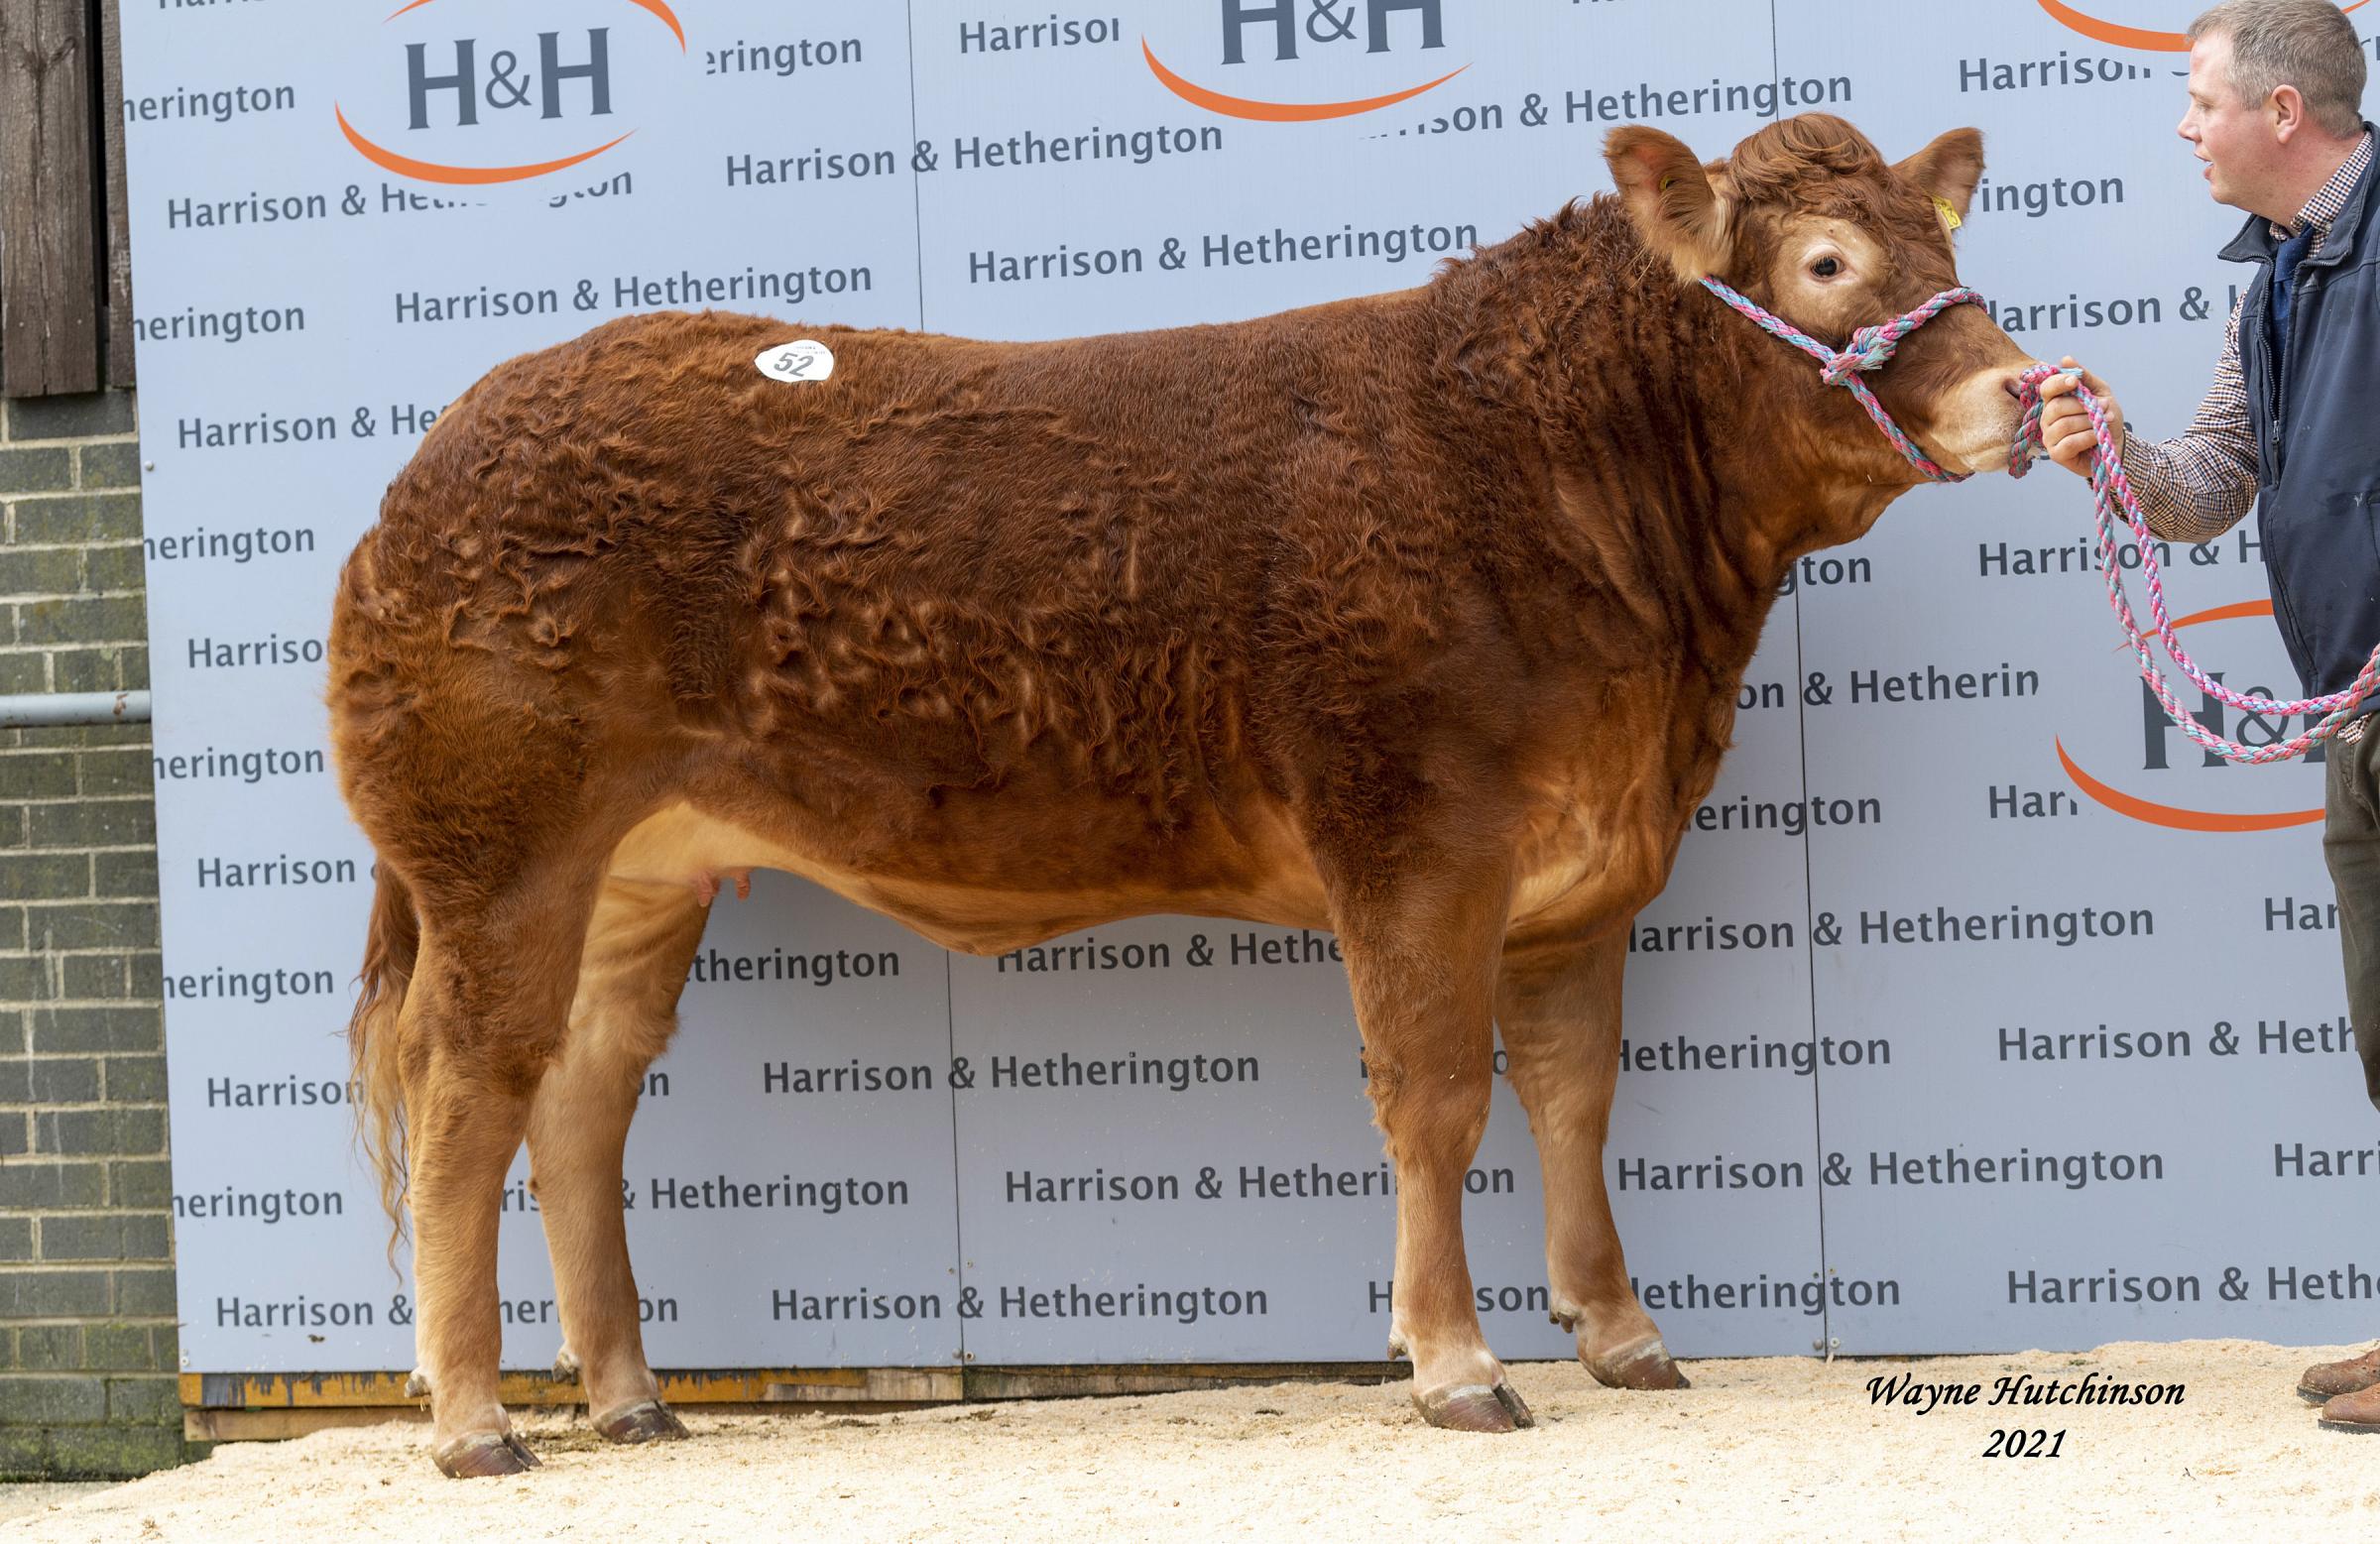 Top price for Doug Mashs Brockhurst consignment was 15,000gns paid for Brockhurst Prudence 